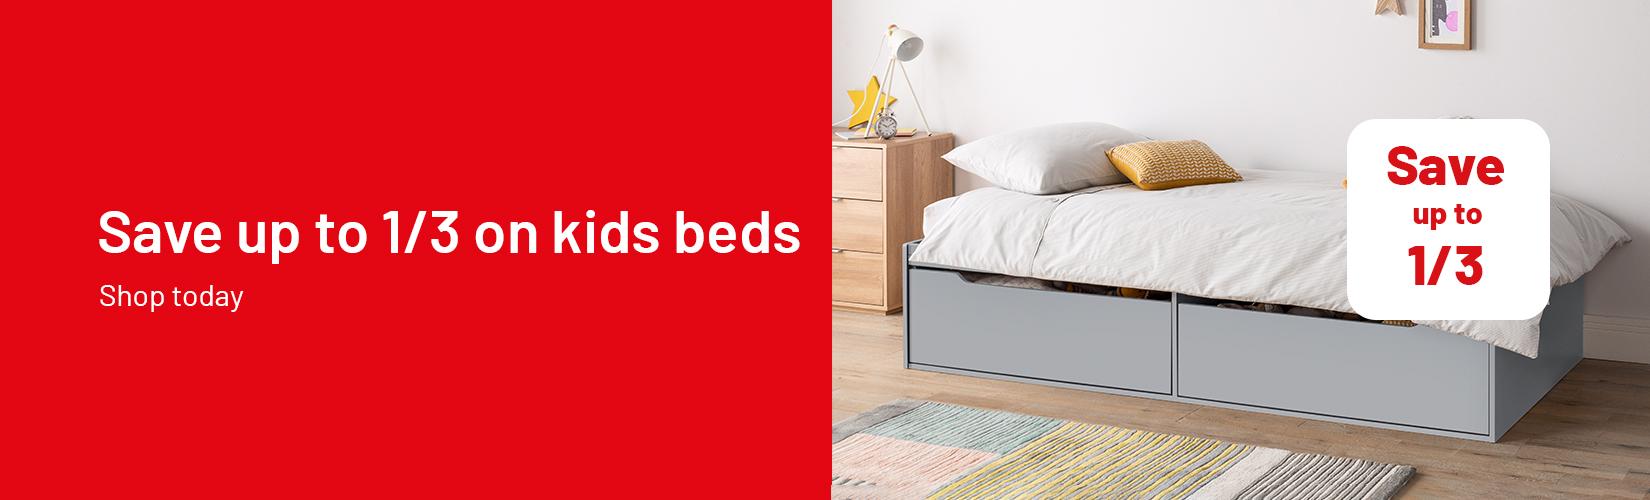 Save up to 1/3 on kids beds.